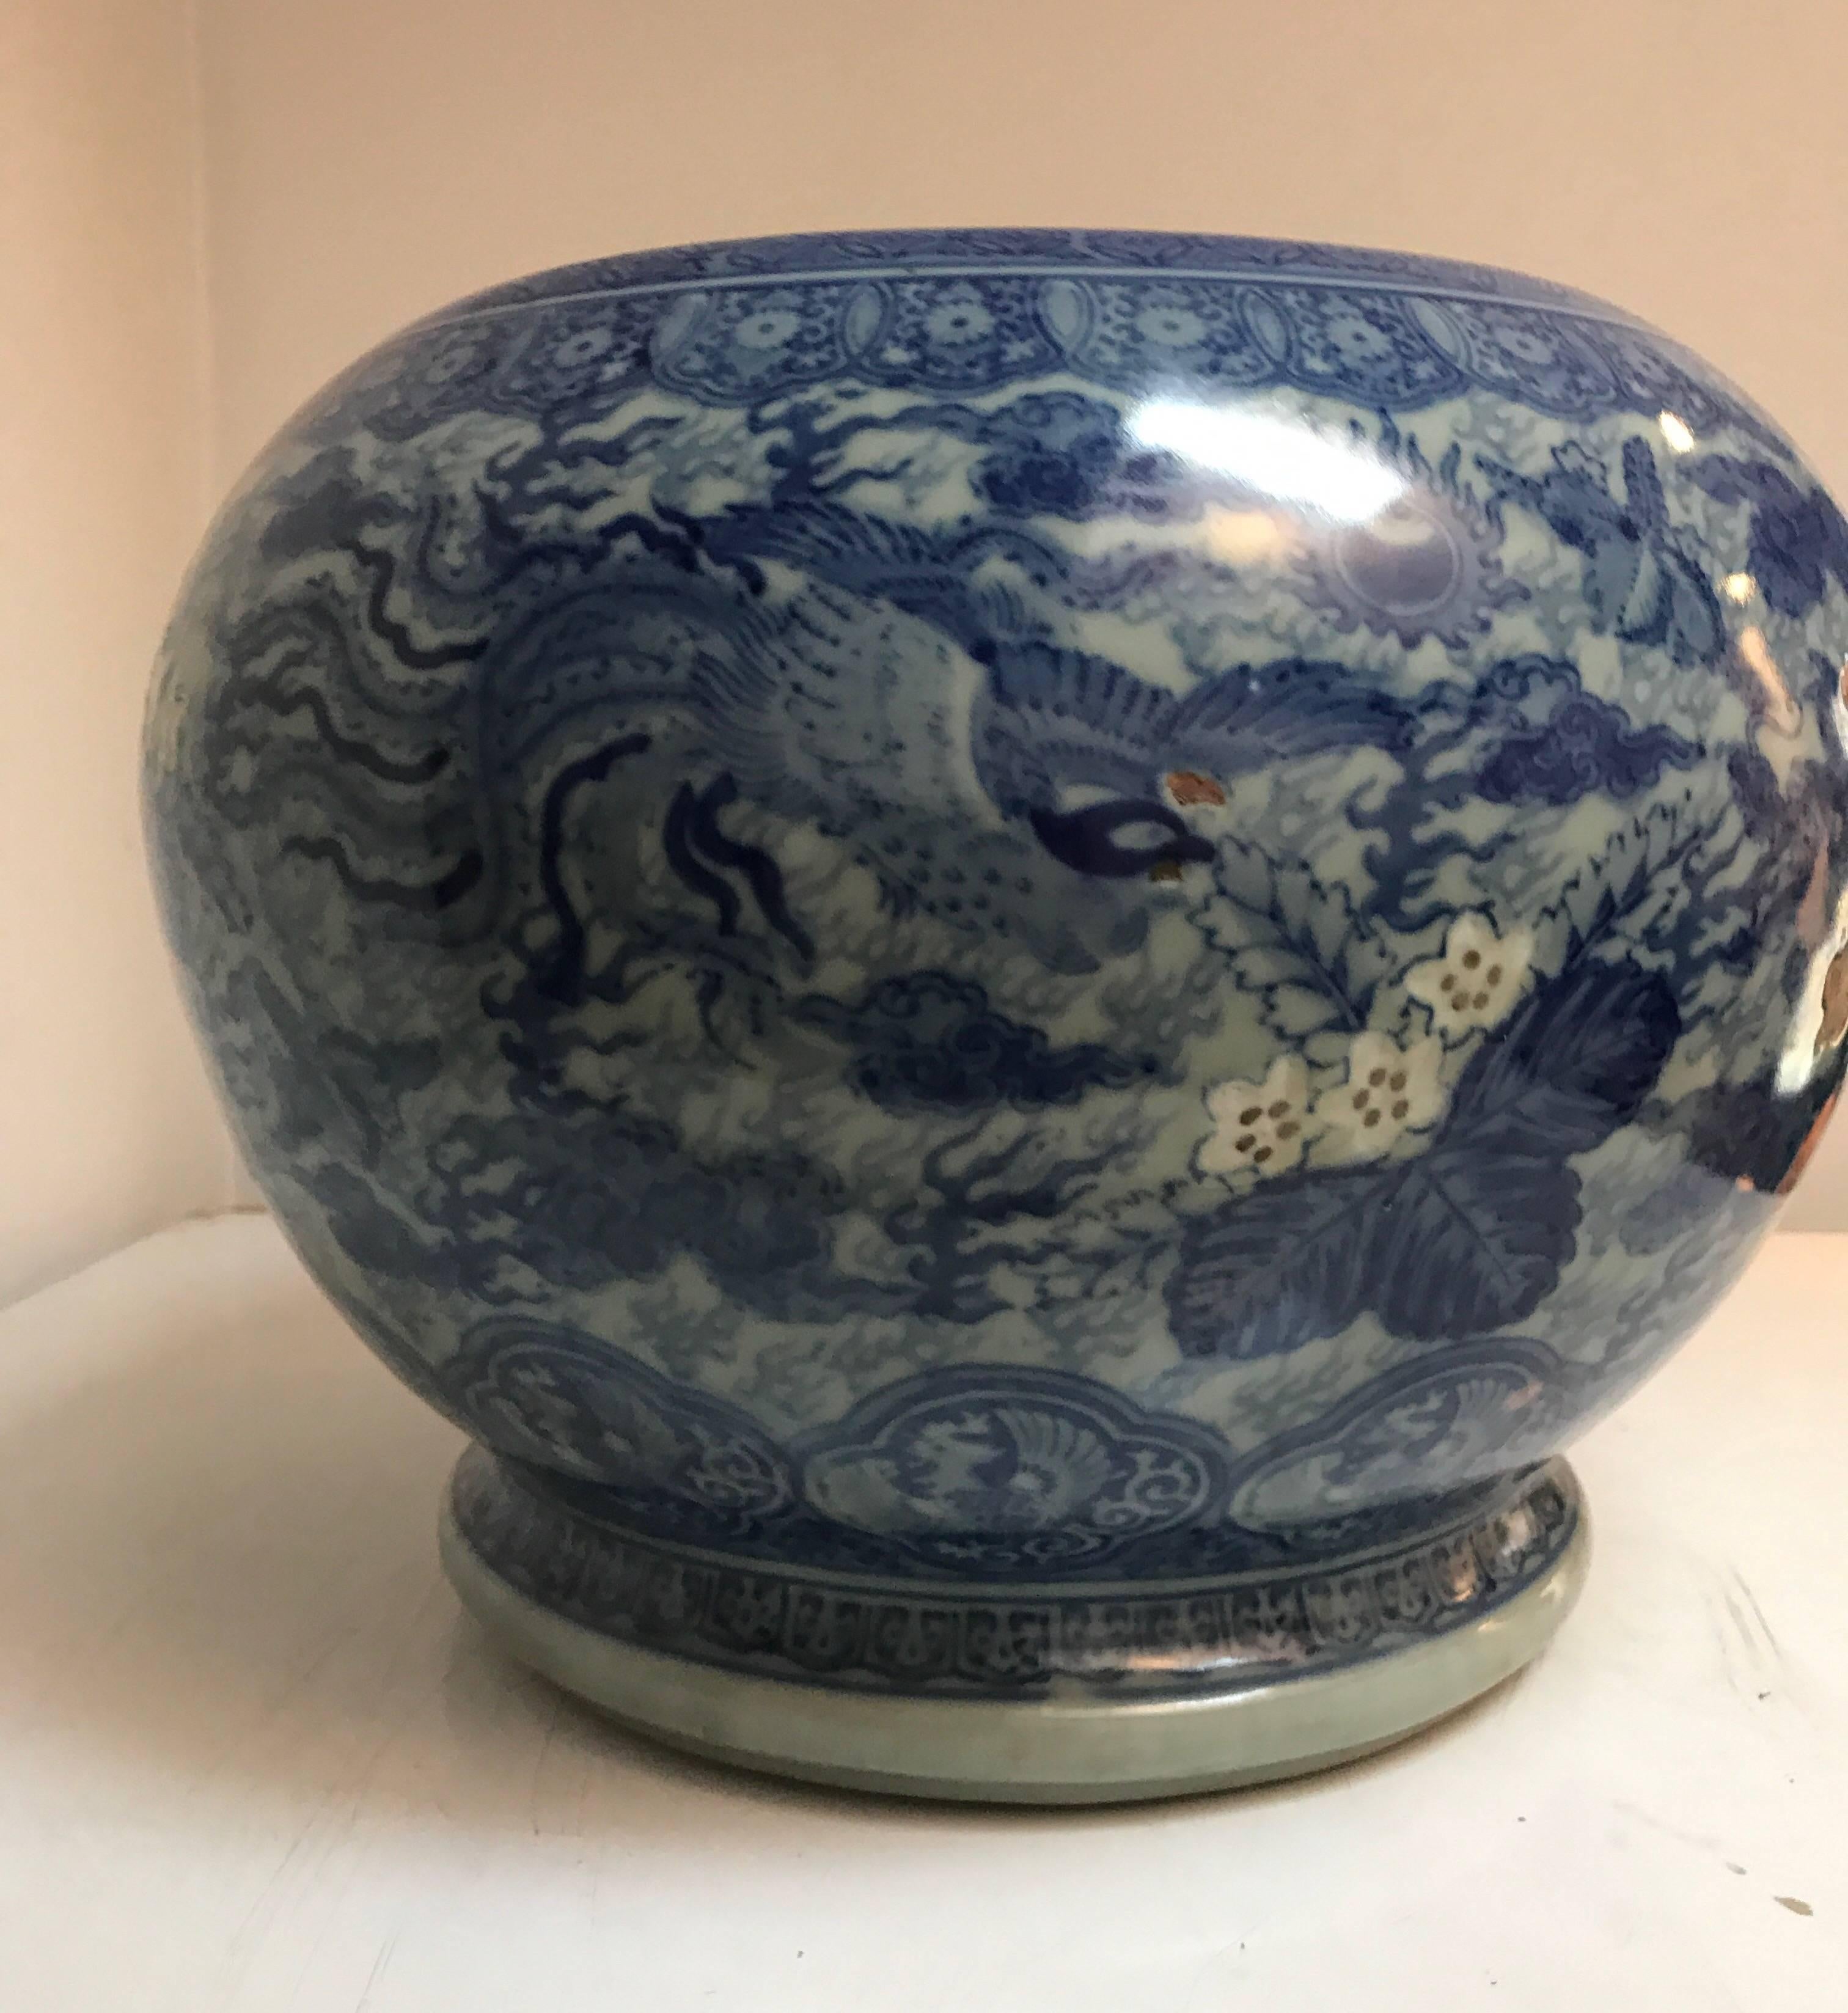 Painted Japanese Blue and White Ceramic Fishbowl Planter Jardinière Cachepot For Sale